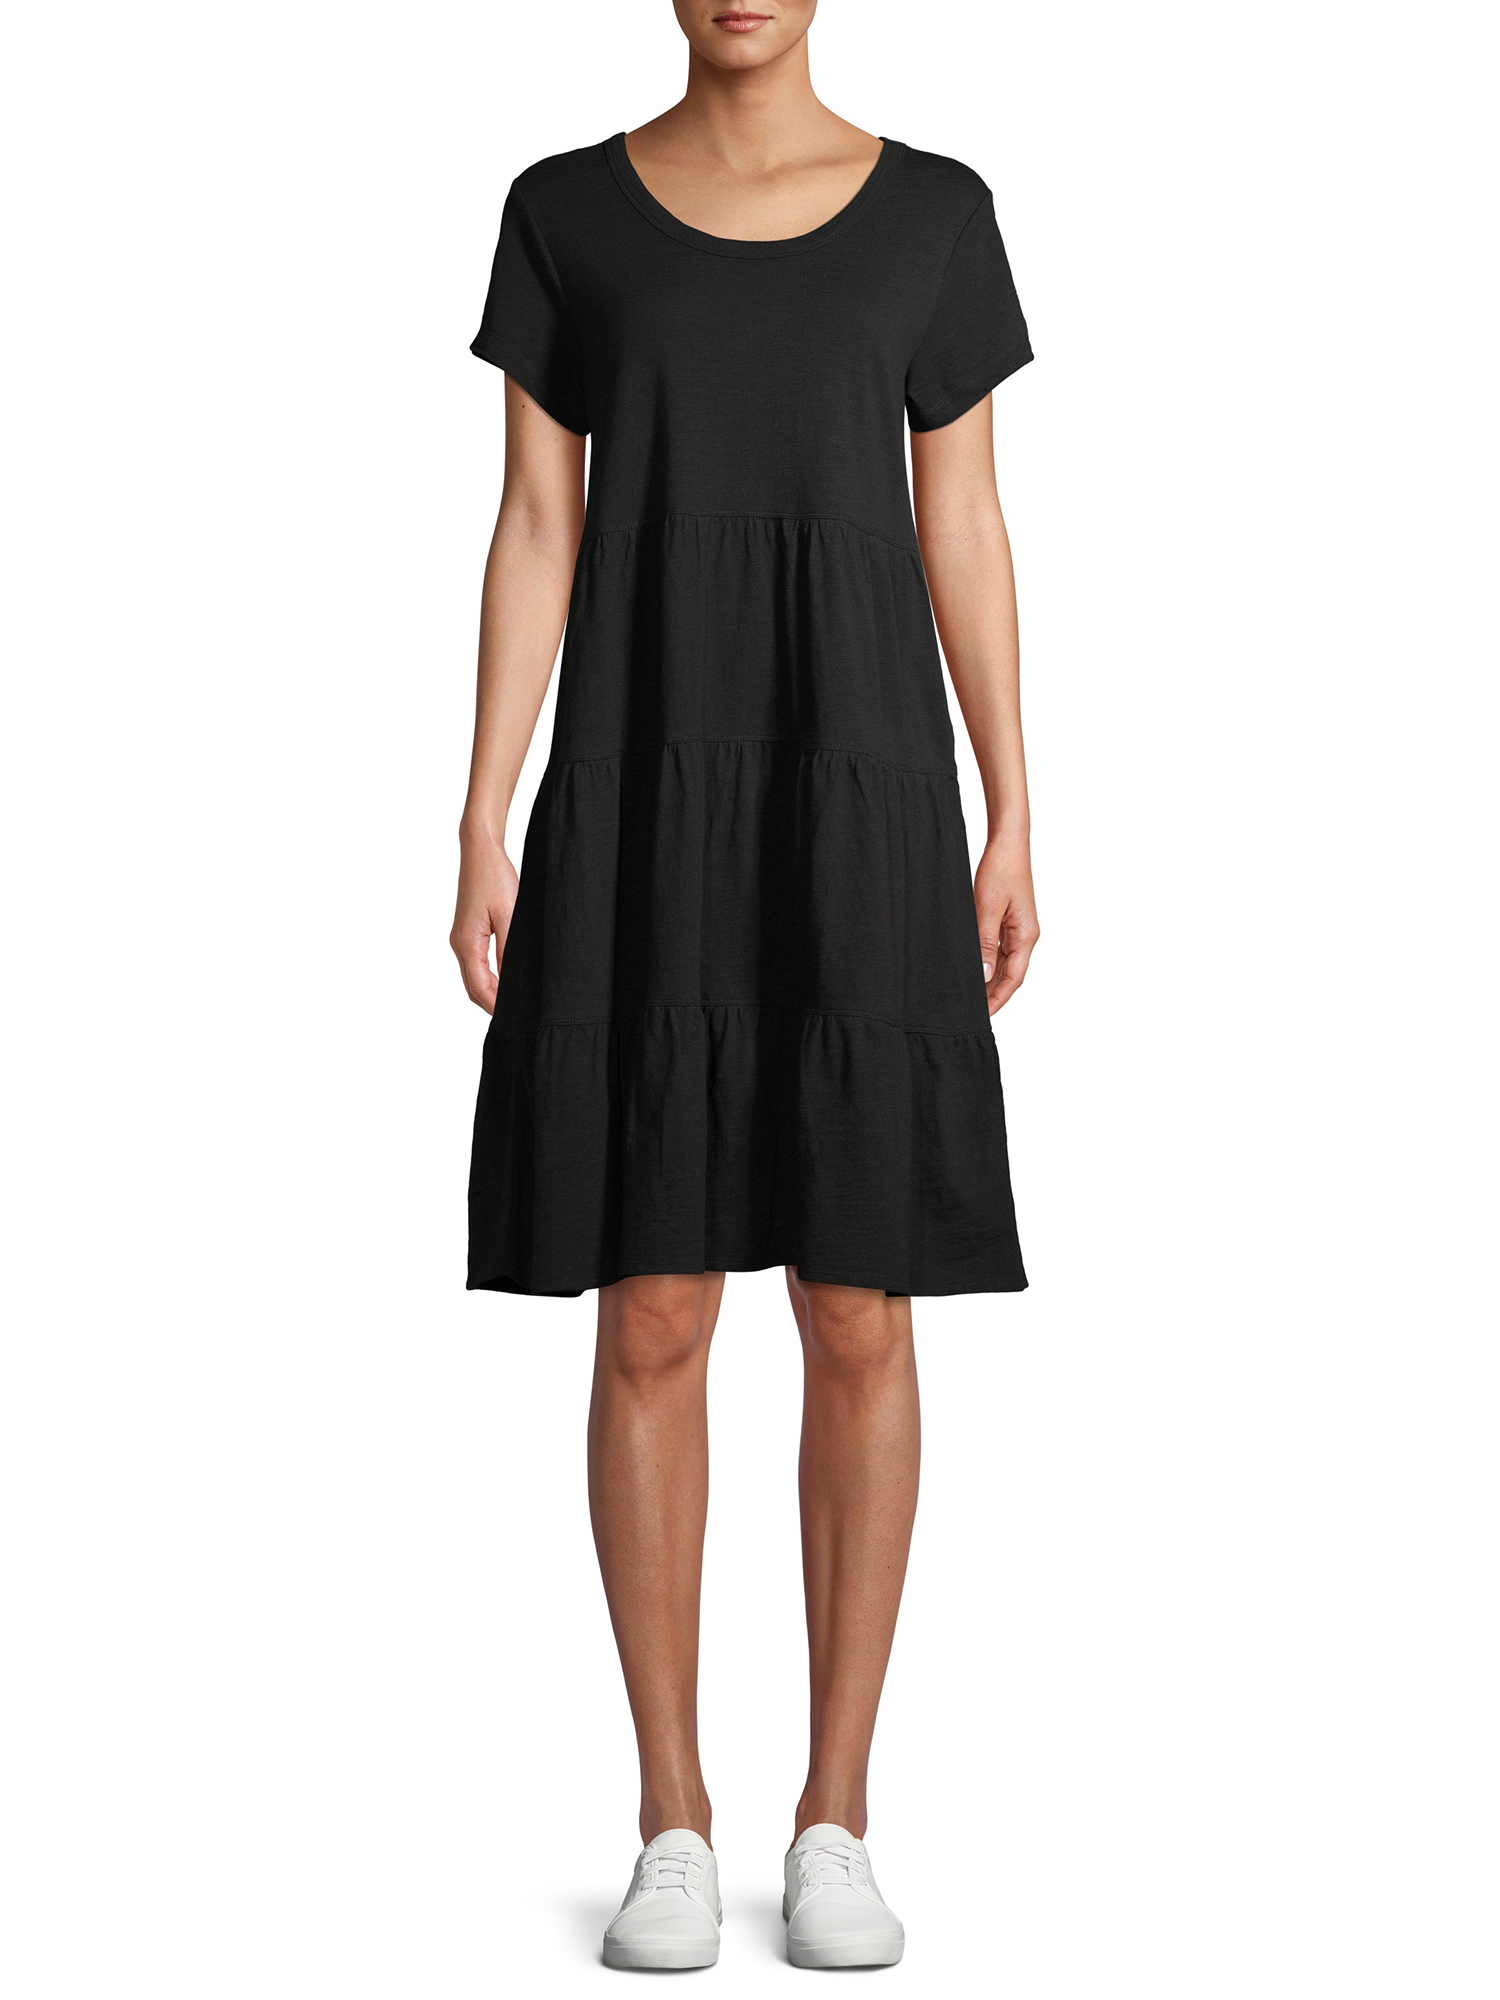 Time and Tru Women's Tiered Knit Dress - image 1 of 6